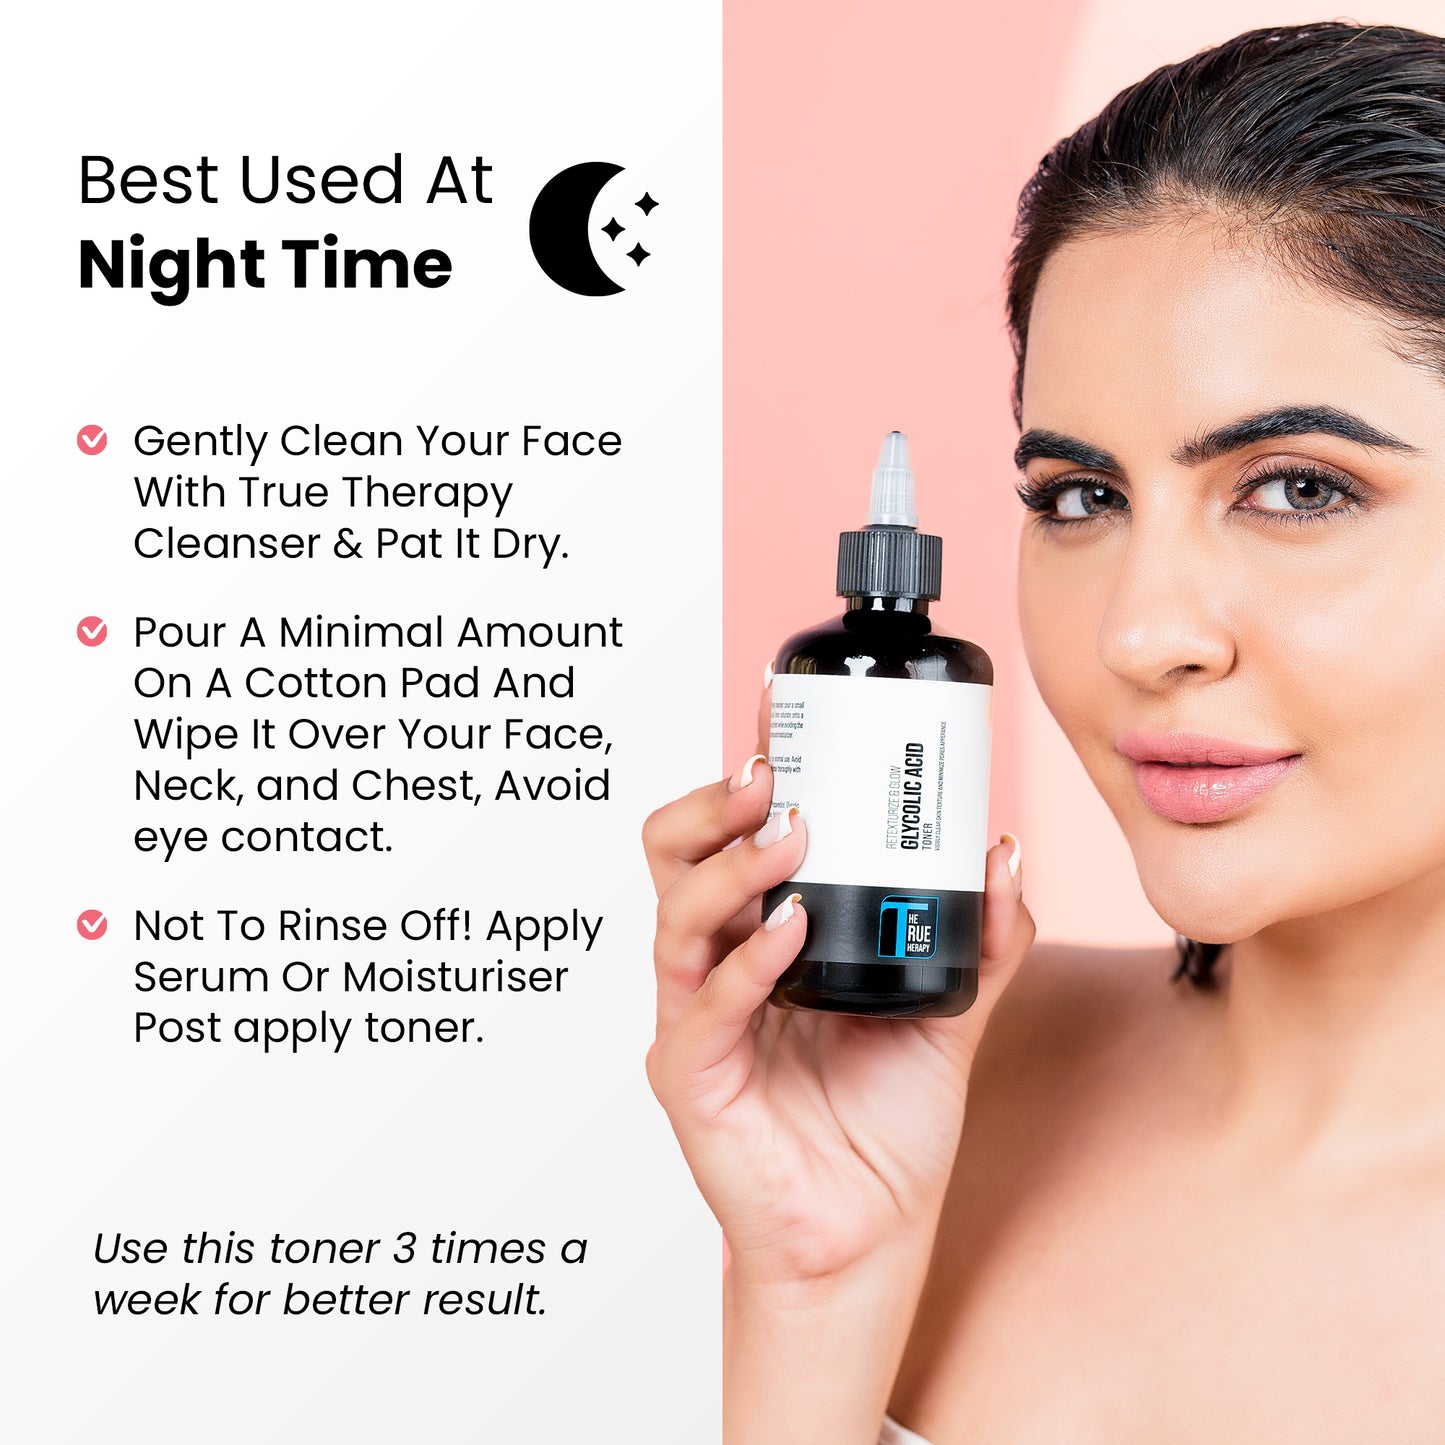 GLYCOLIC ACID 10% TONER - Best Time To Use - The True Therapy 